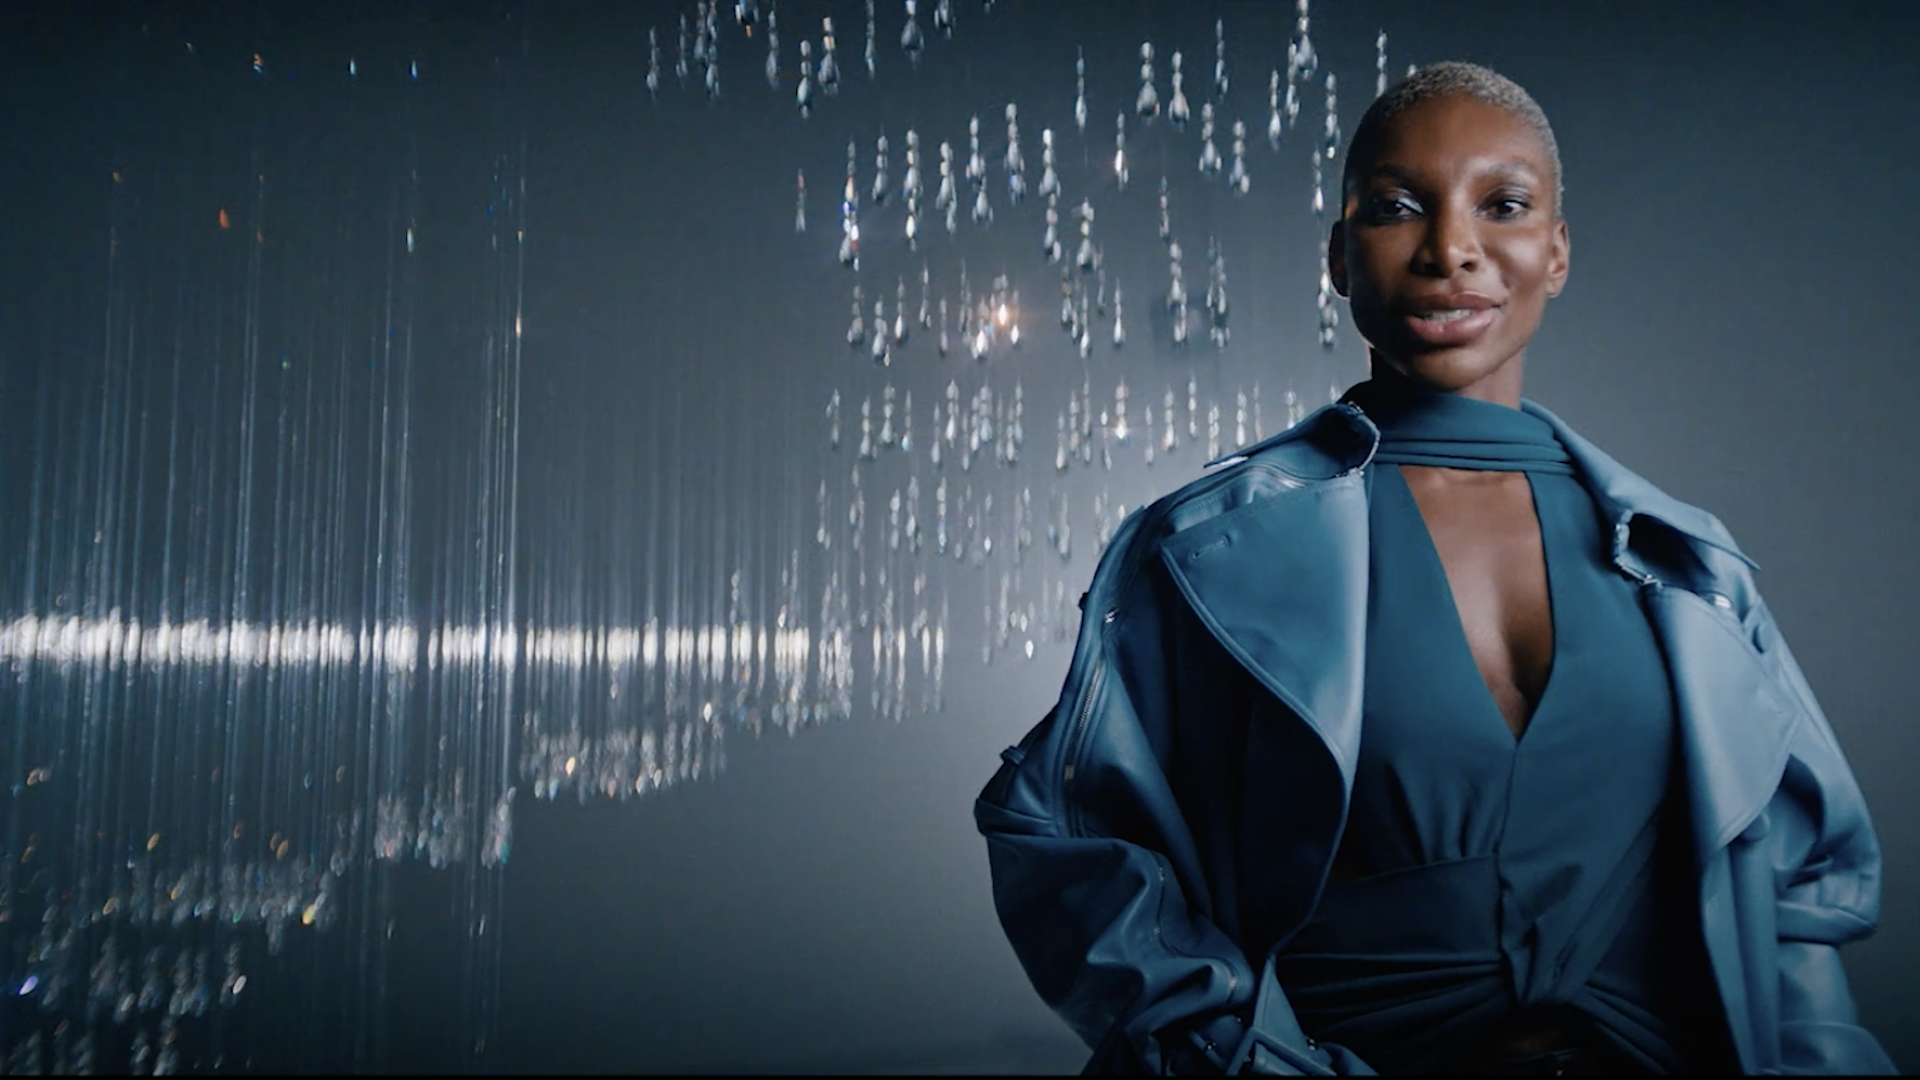 BMW in partnership with the BFI, featuring Michaela Coel